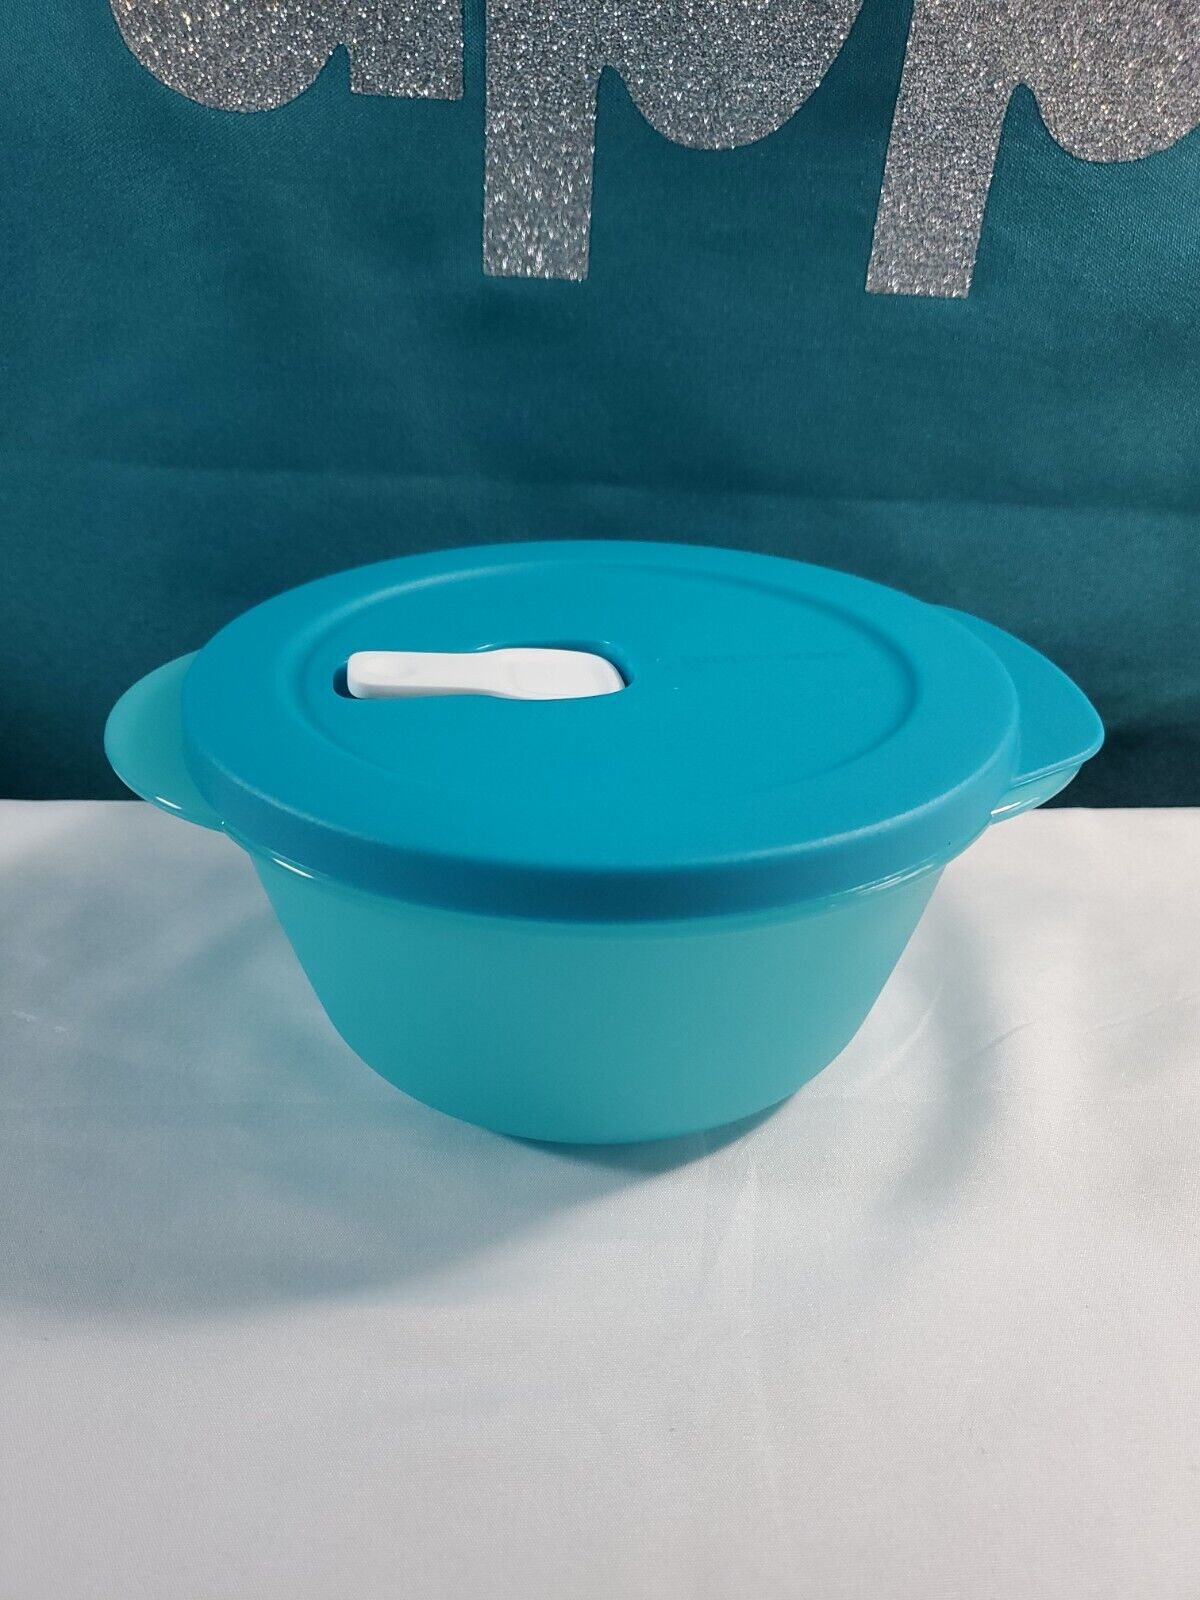 Tupperware CrystalWave Microwave 3.25 Cup Round Bowl Container Sale New 